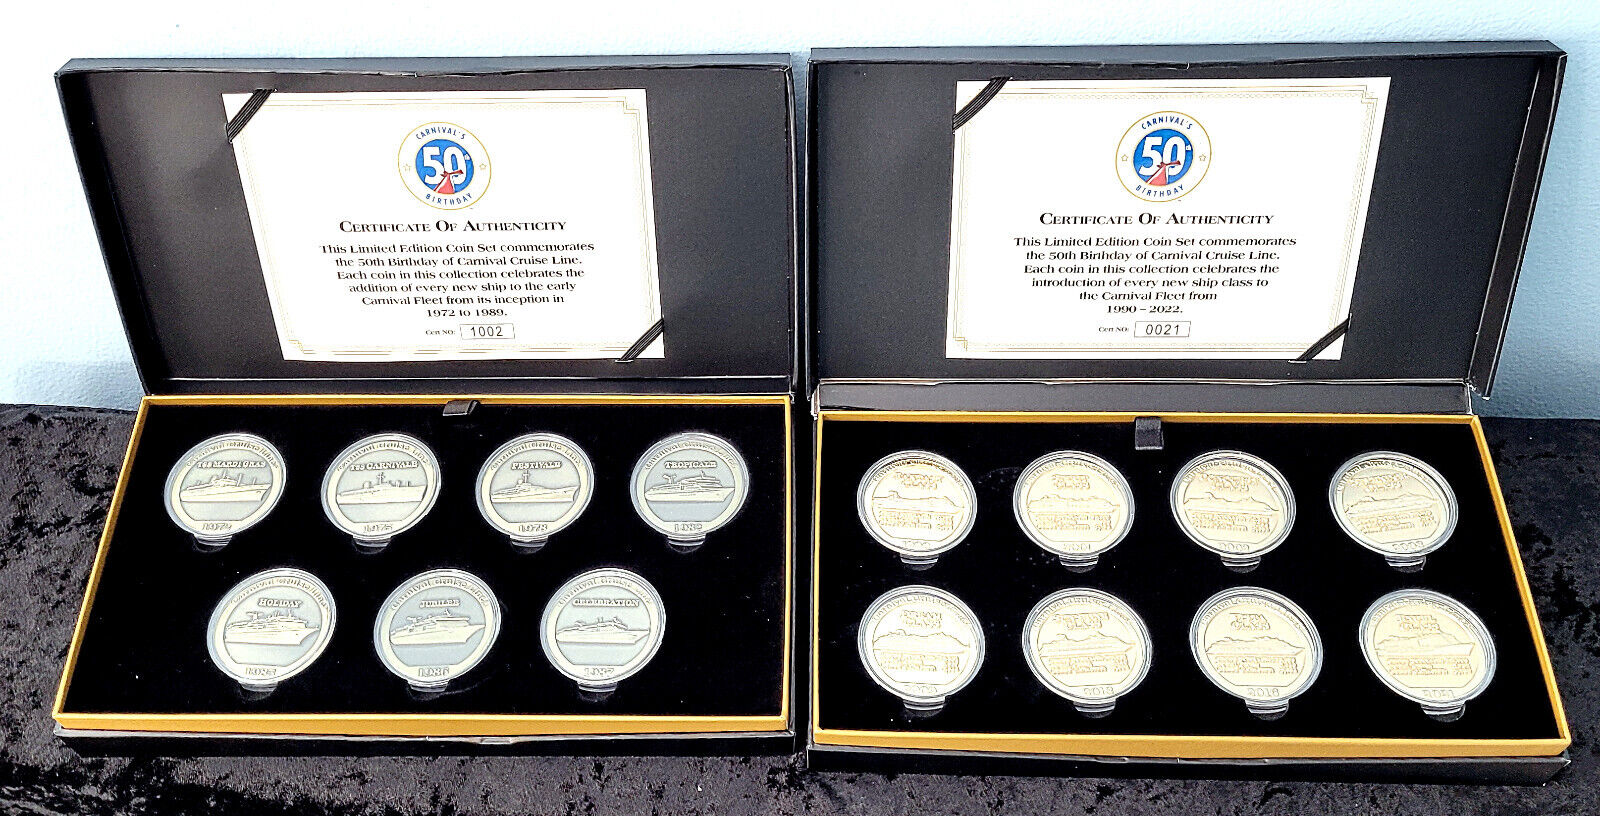 Carnival Ships Evolution of Fun Limited Edition Coin Set 1972-1989 1990-2022(L2)